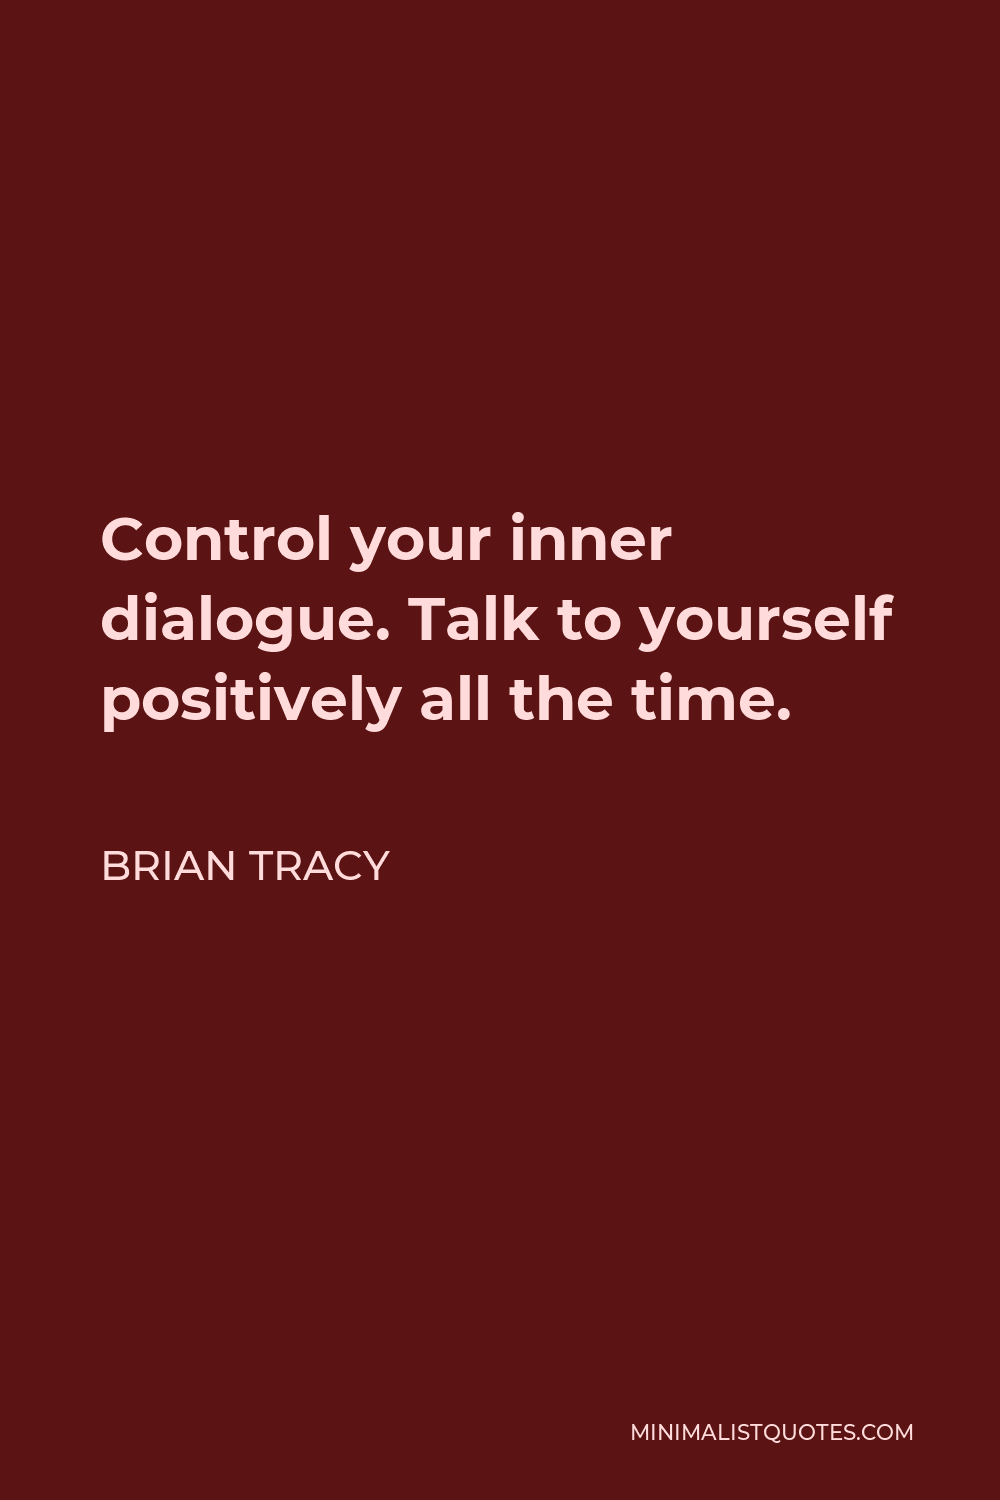 Brian Tracy Quote - Control your inner dialogue. Talk to yourself positively all the time.